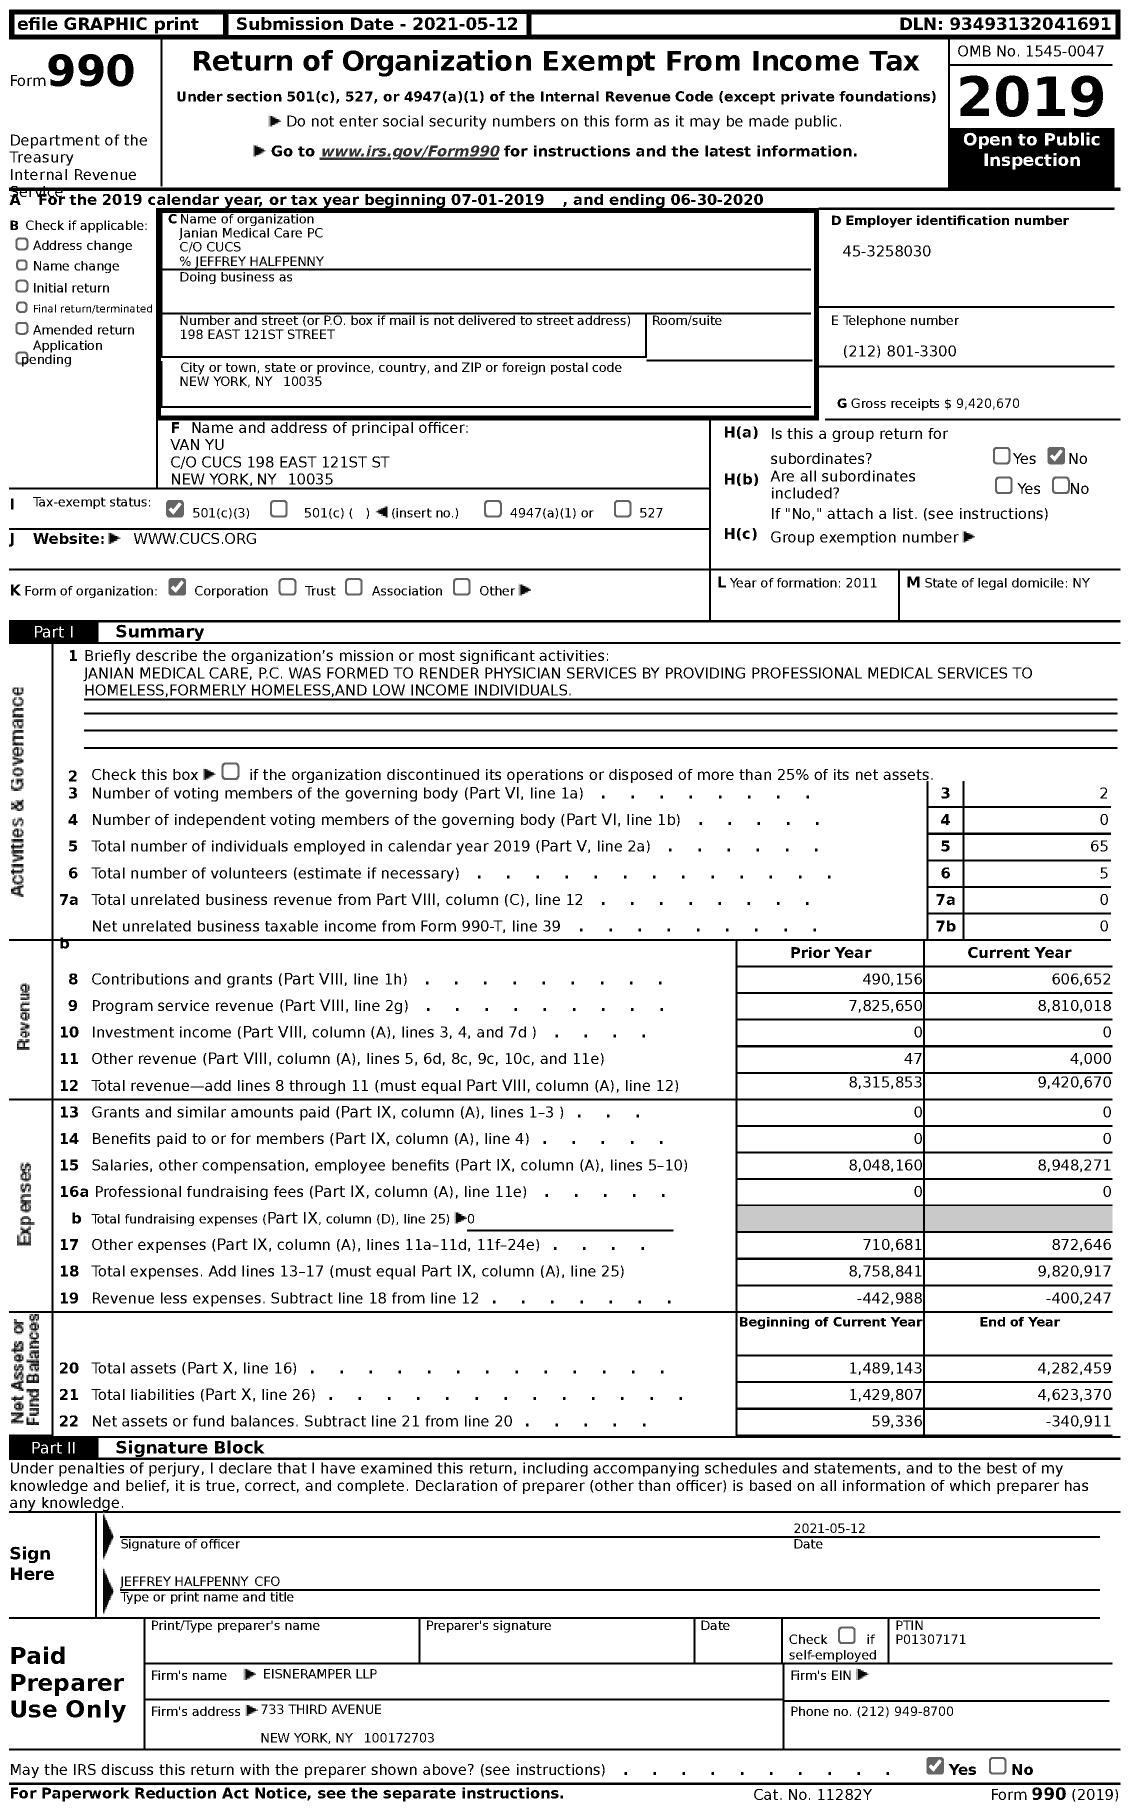 Image of first page of 2019 Form 990 for Janian Medical Care PC (CUCS)